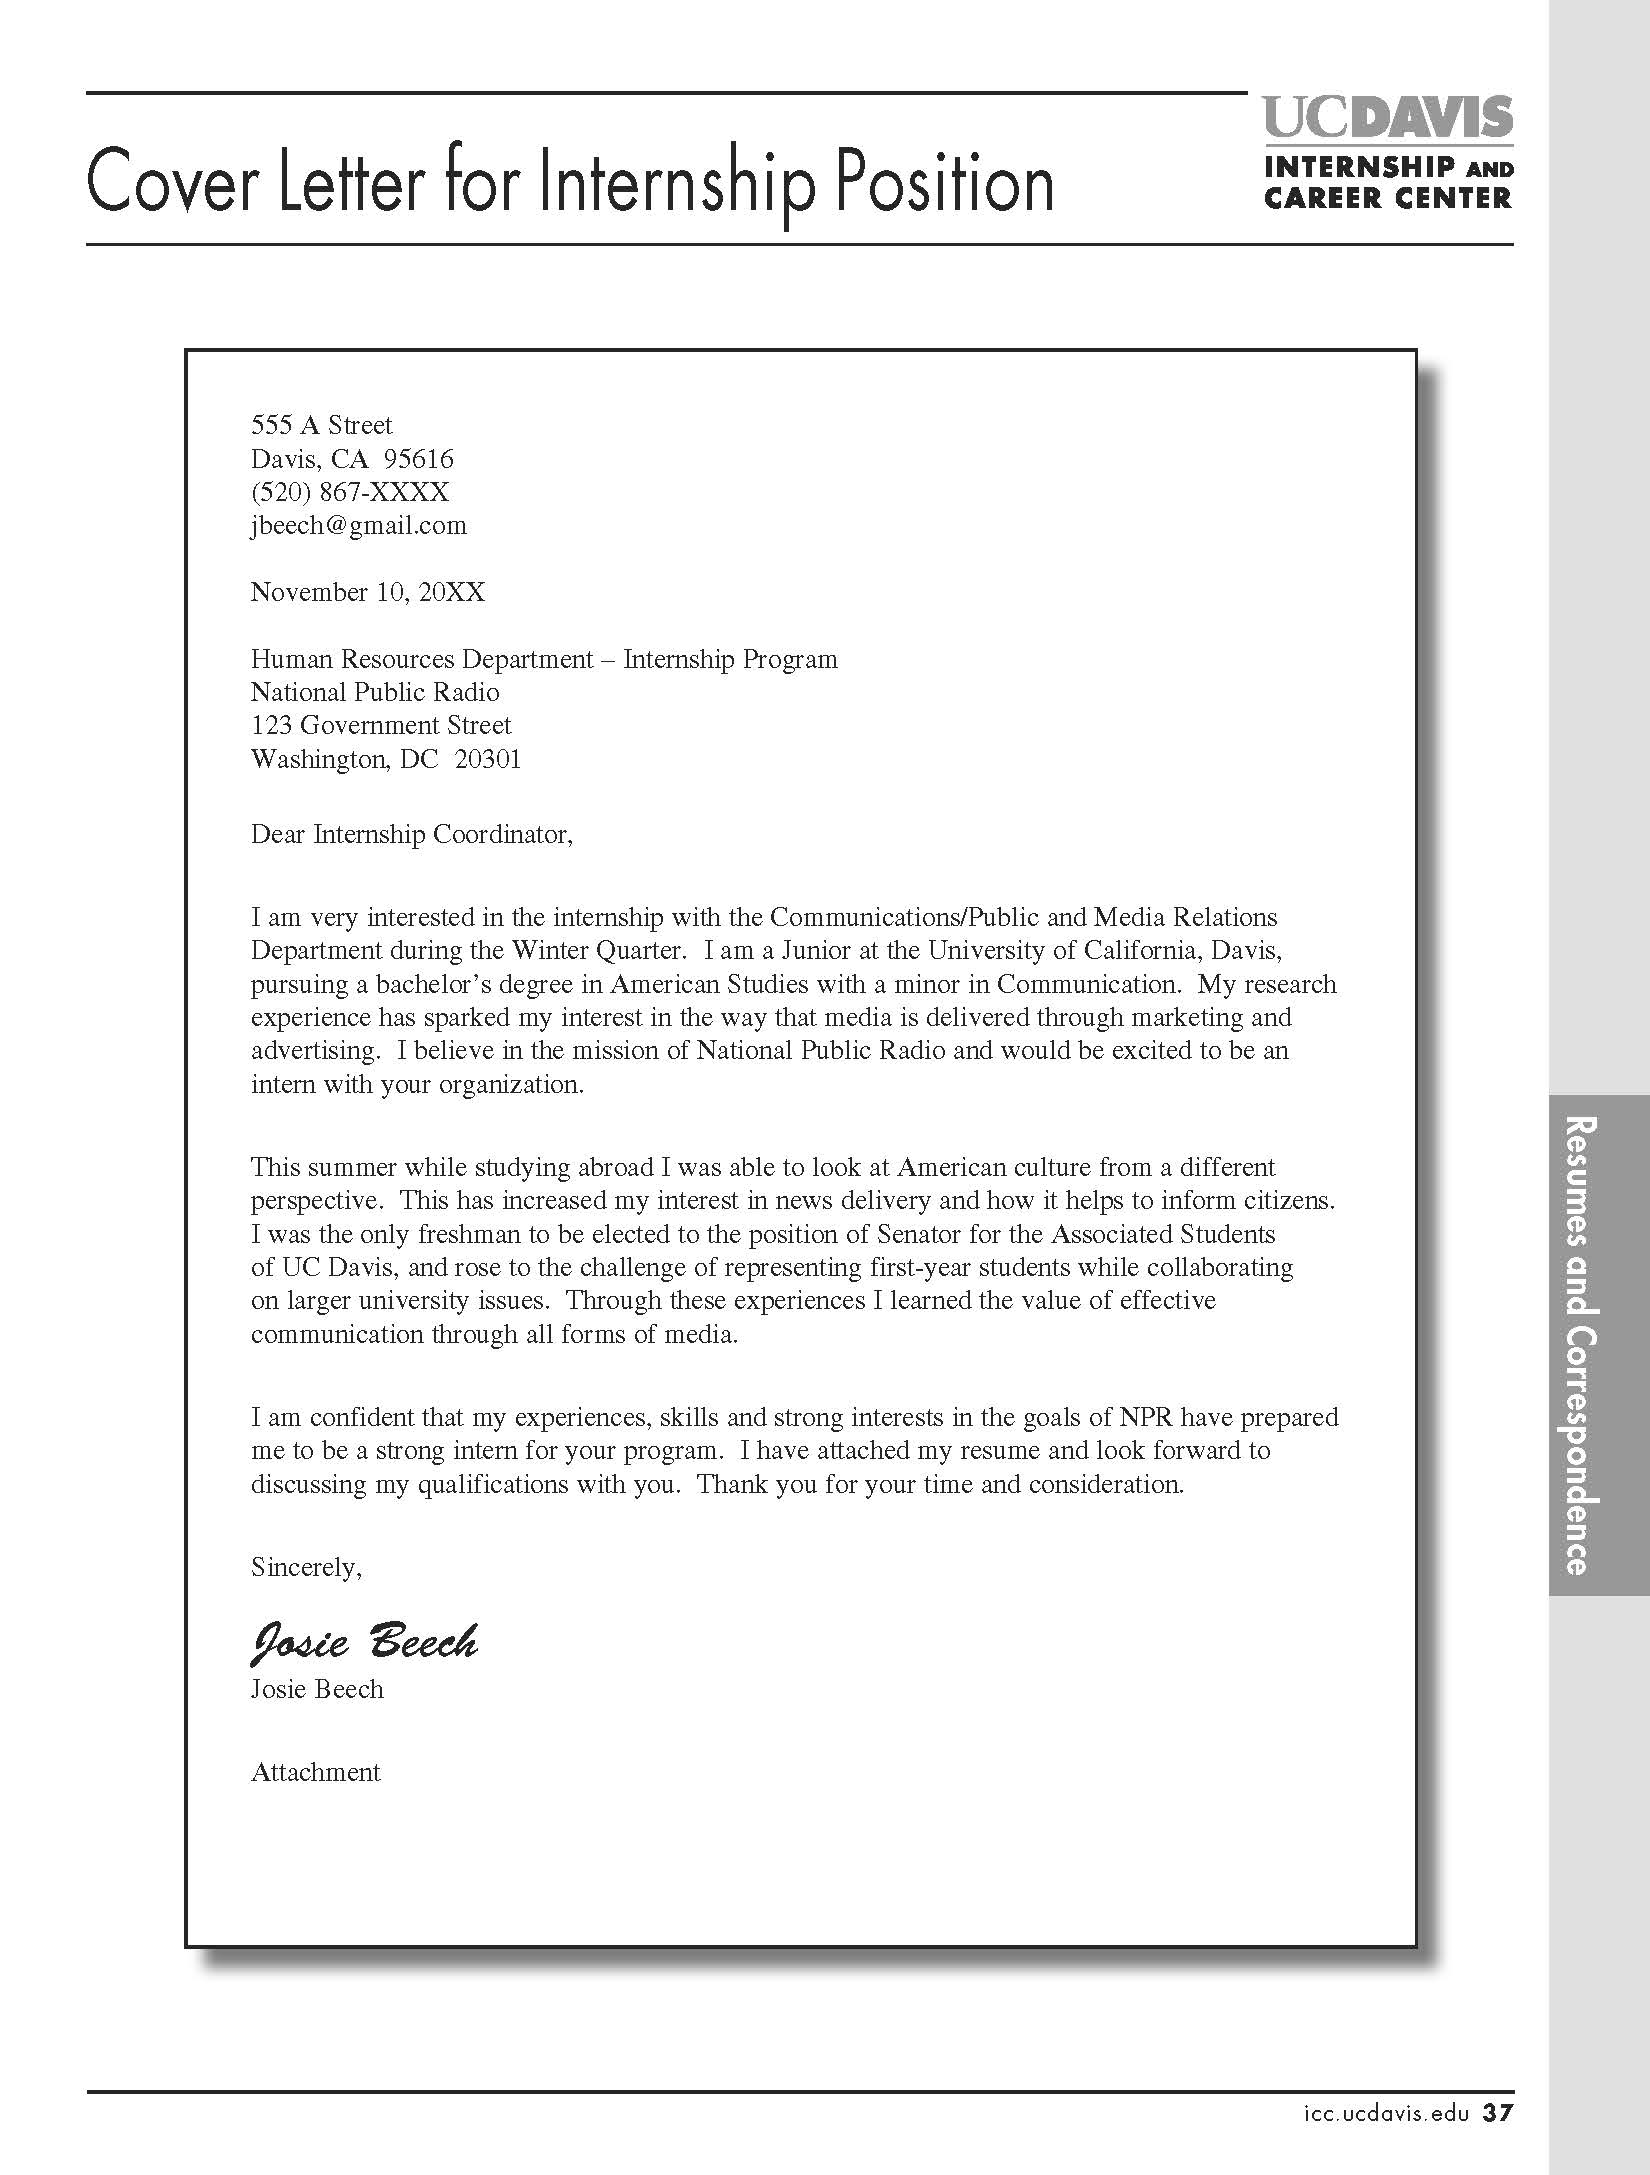 Sample Internship Cover Letter from content.wisestep.com